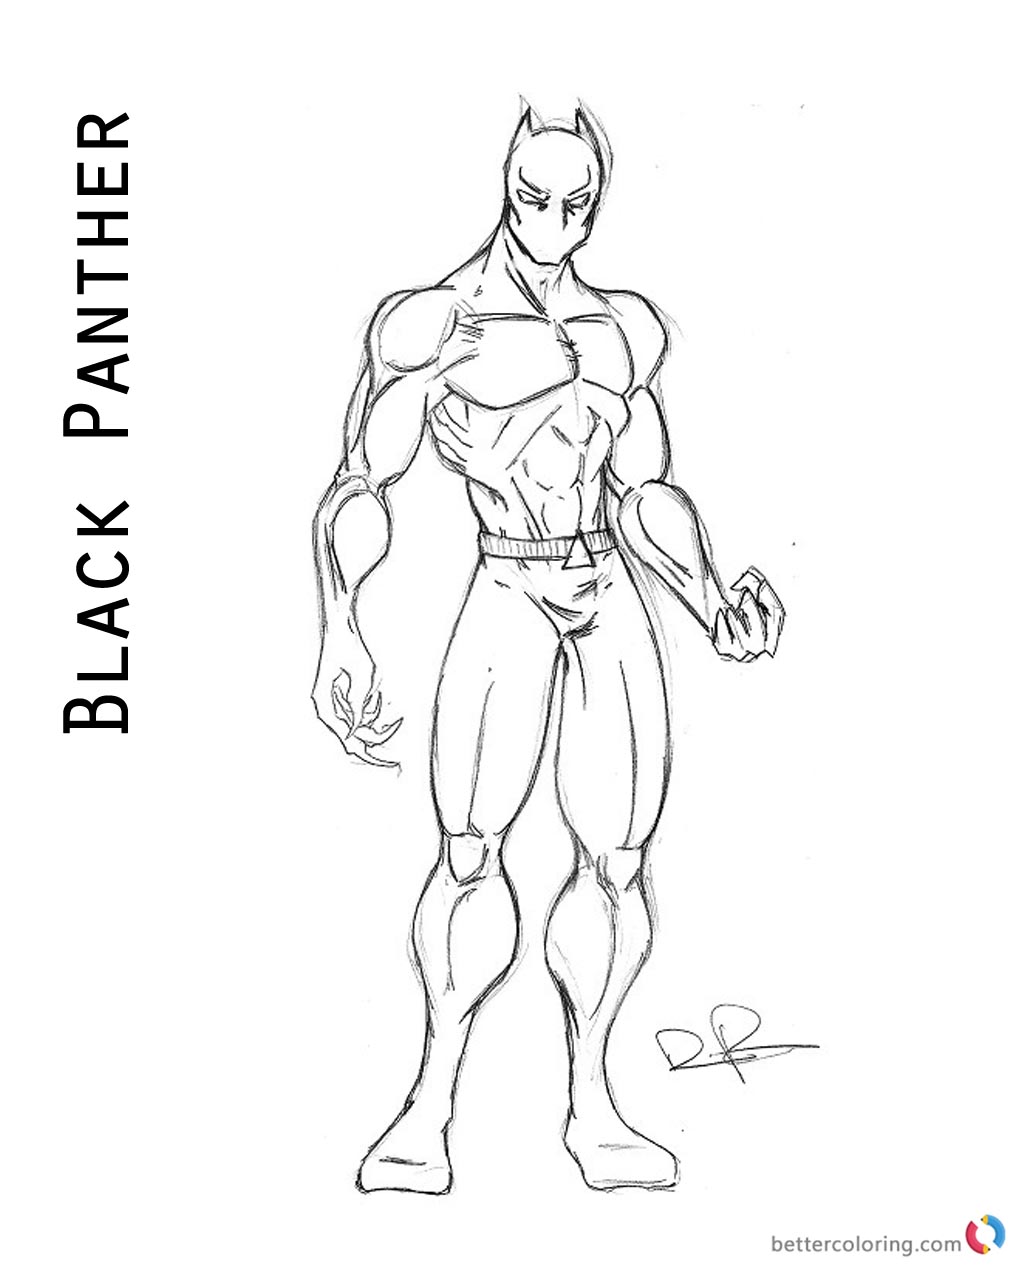 superhero-black-panther-coloring-page-free-printable-coloring-pages